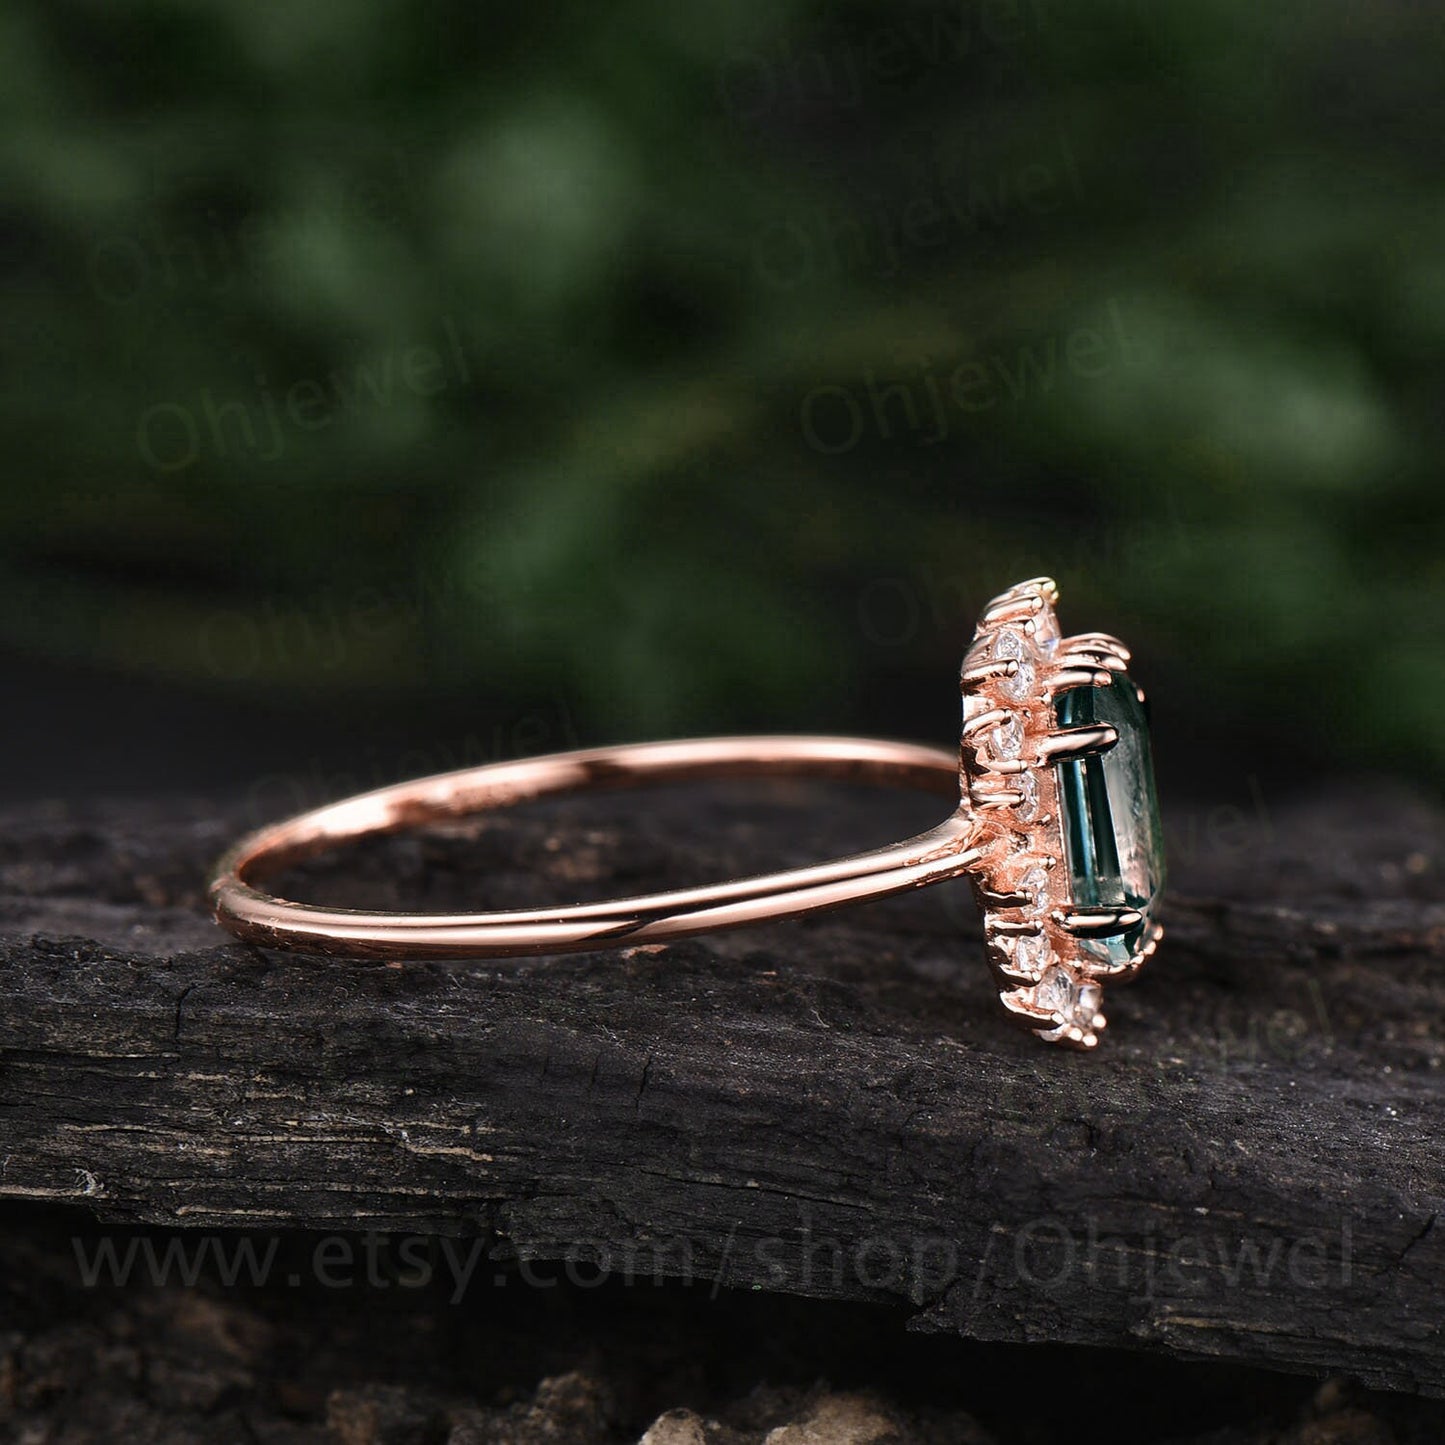 Unique moss agate ring emerald cut moss agate engagement ring for women vintage cluster halo moissanite ring gold silver dainty jewelry gift